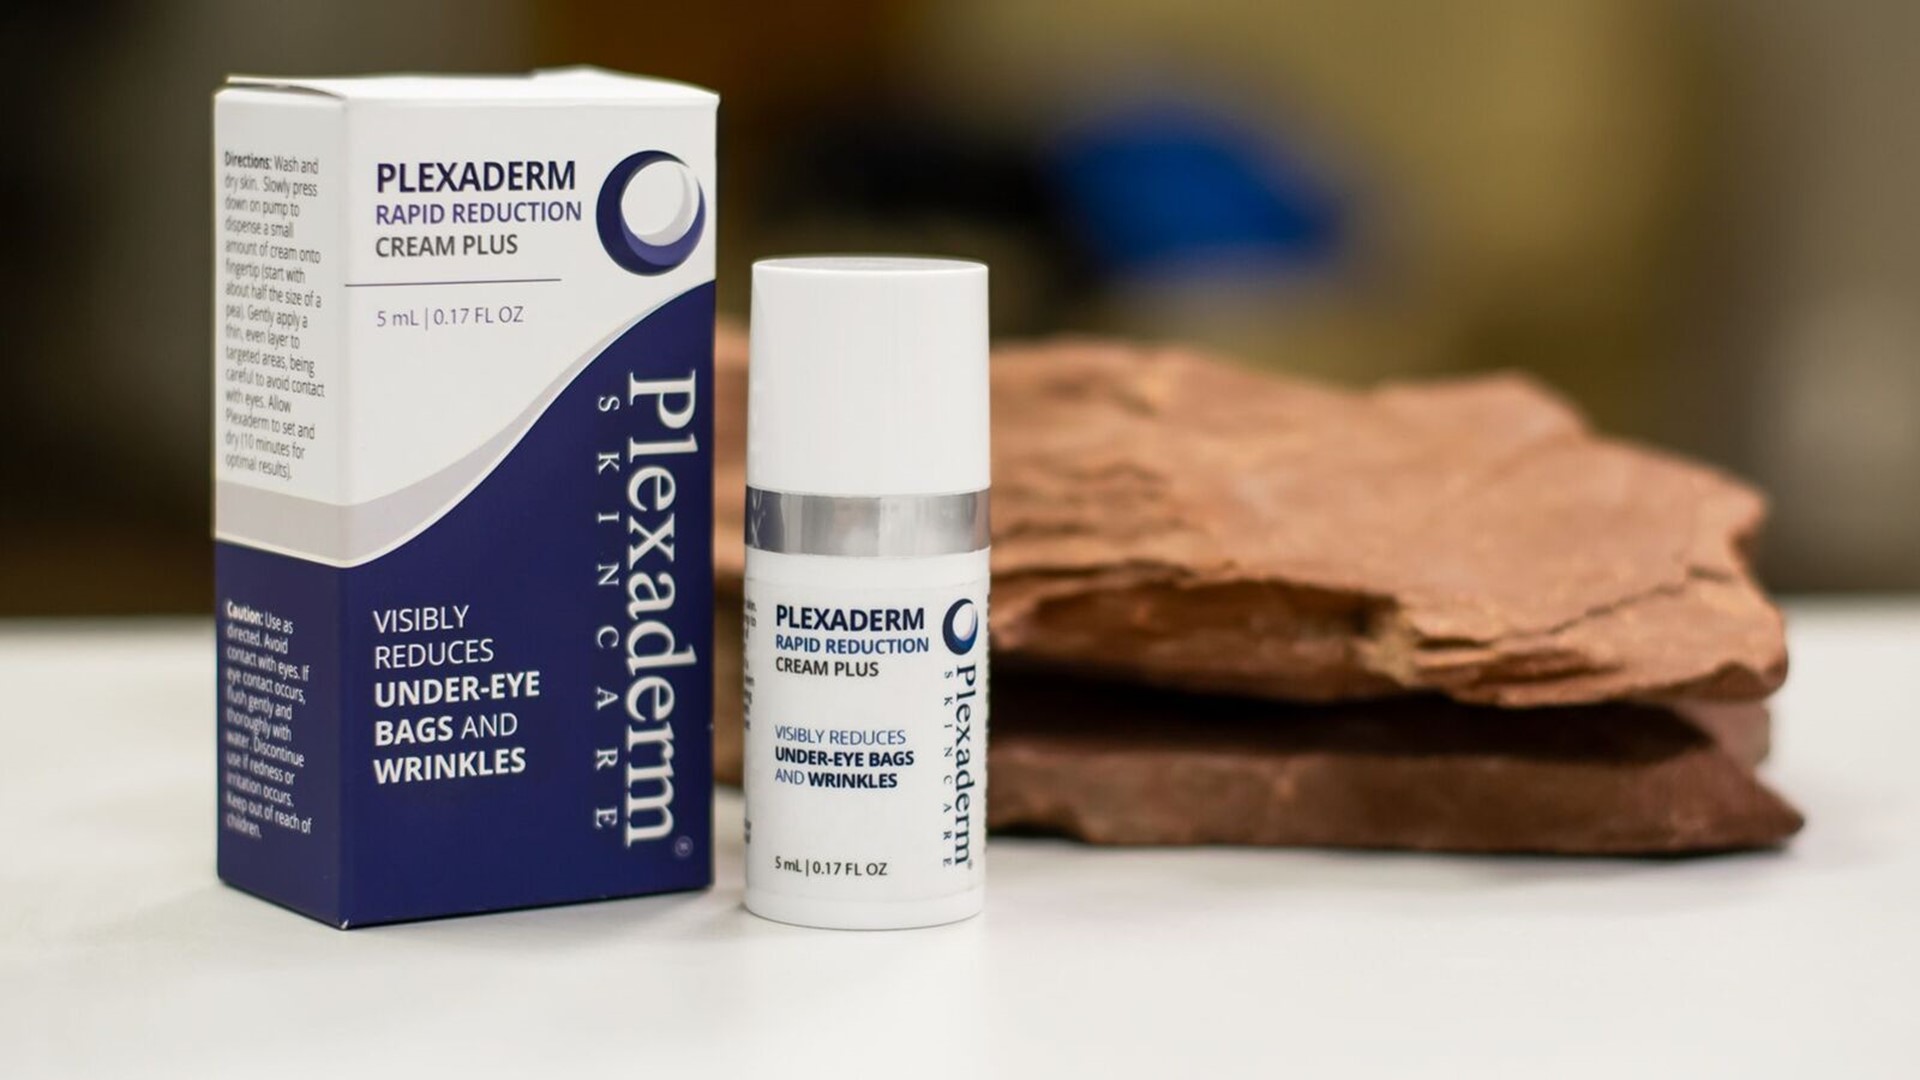 If you've tried expensive creams and even considered painful, costly injections to rid your face of the typical signs of aging, look no further. Plexaderm has the results you’ve been looking for.